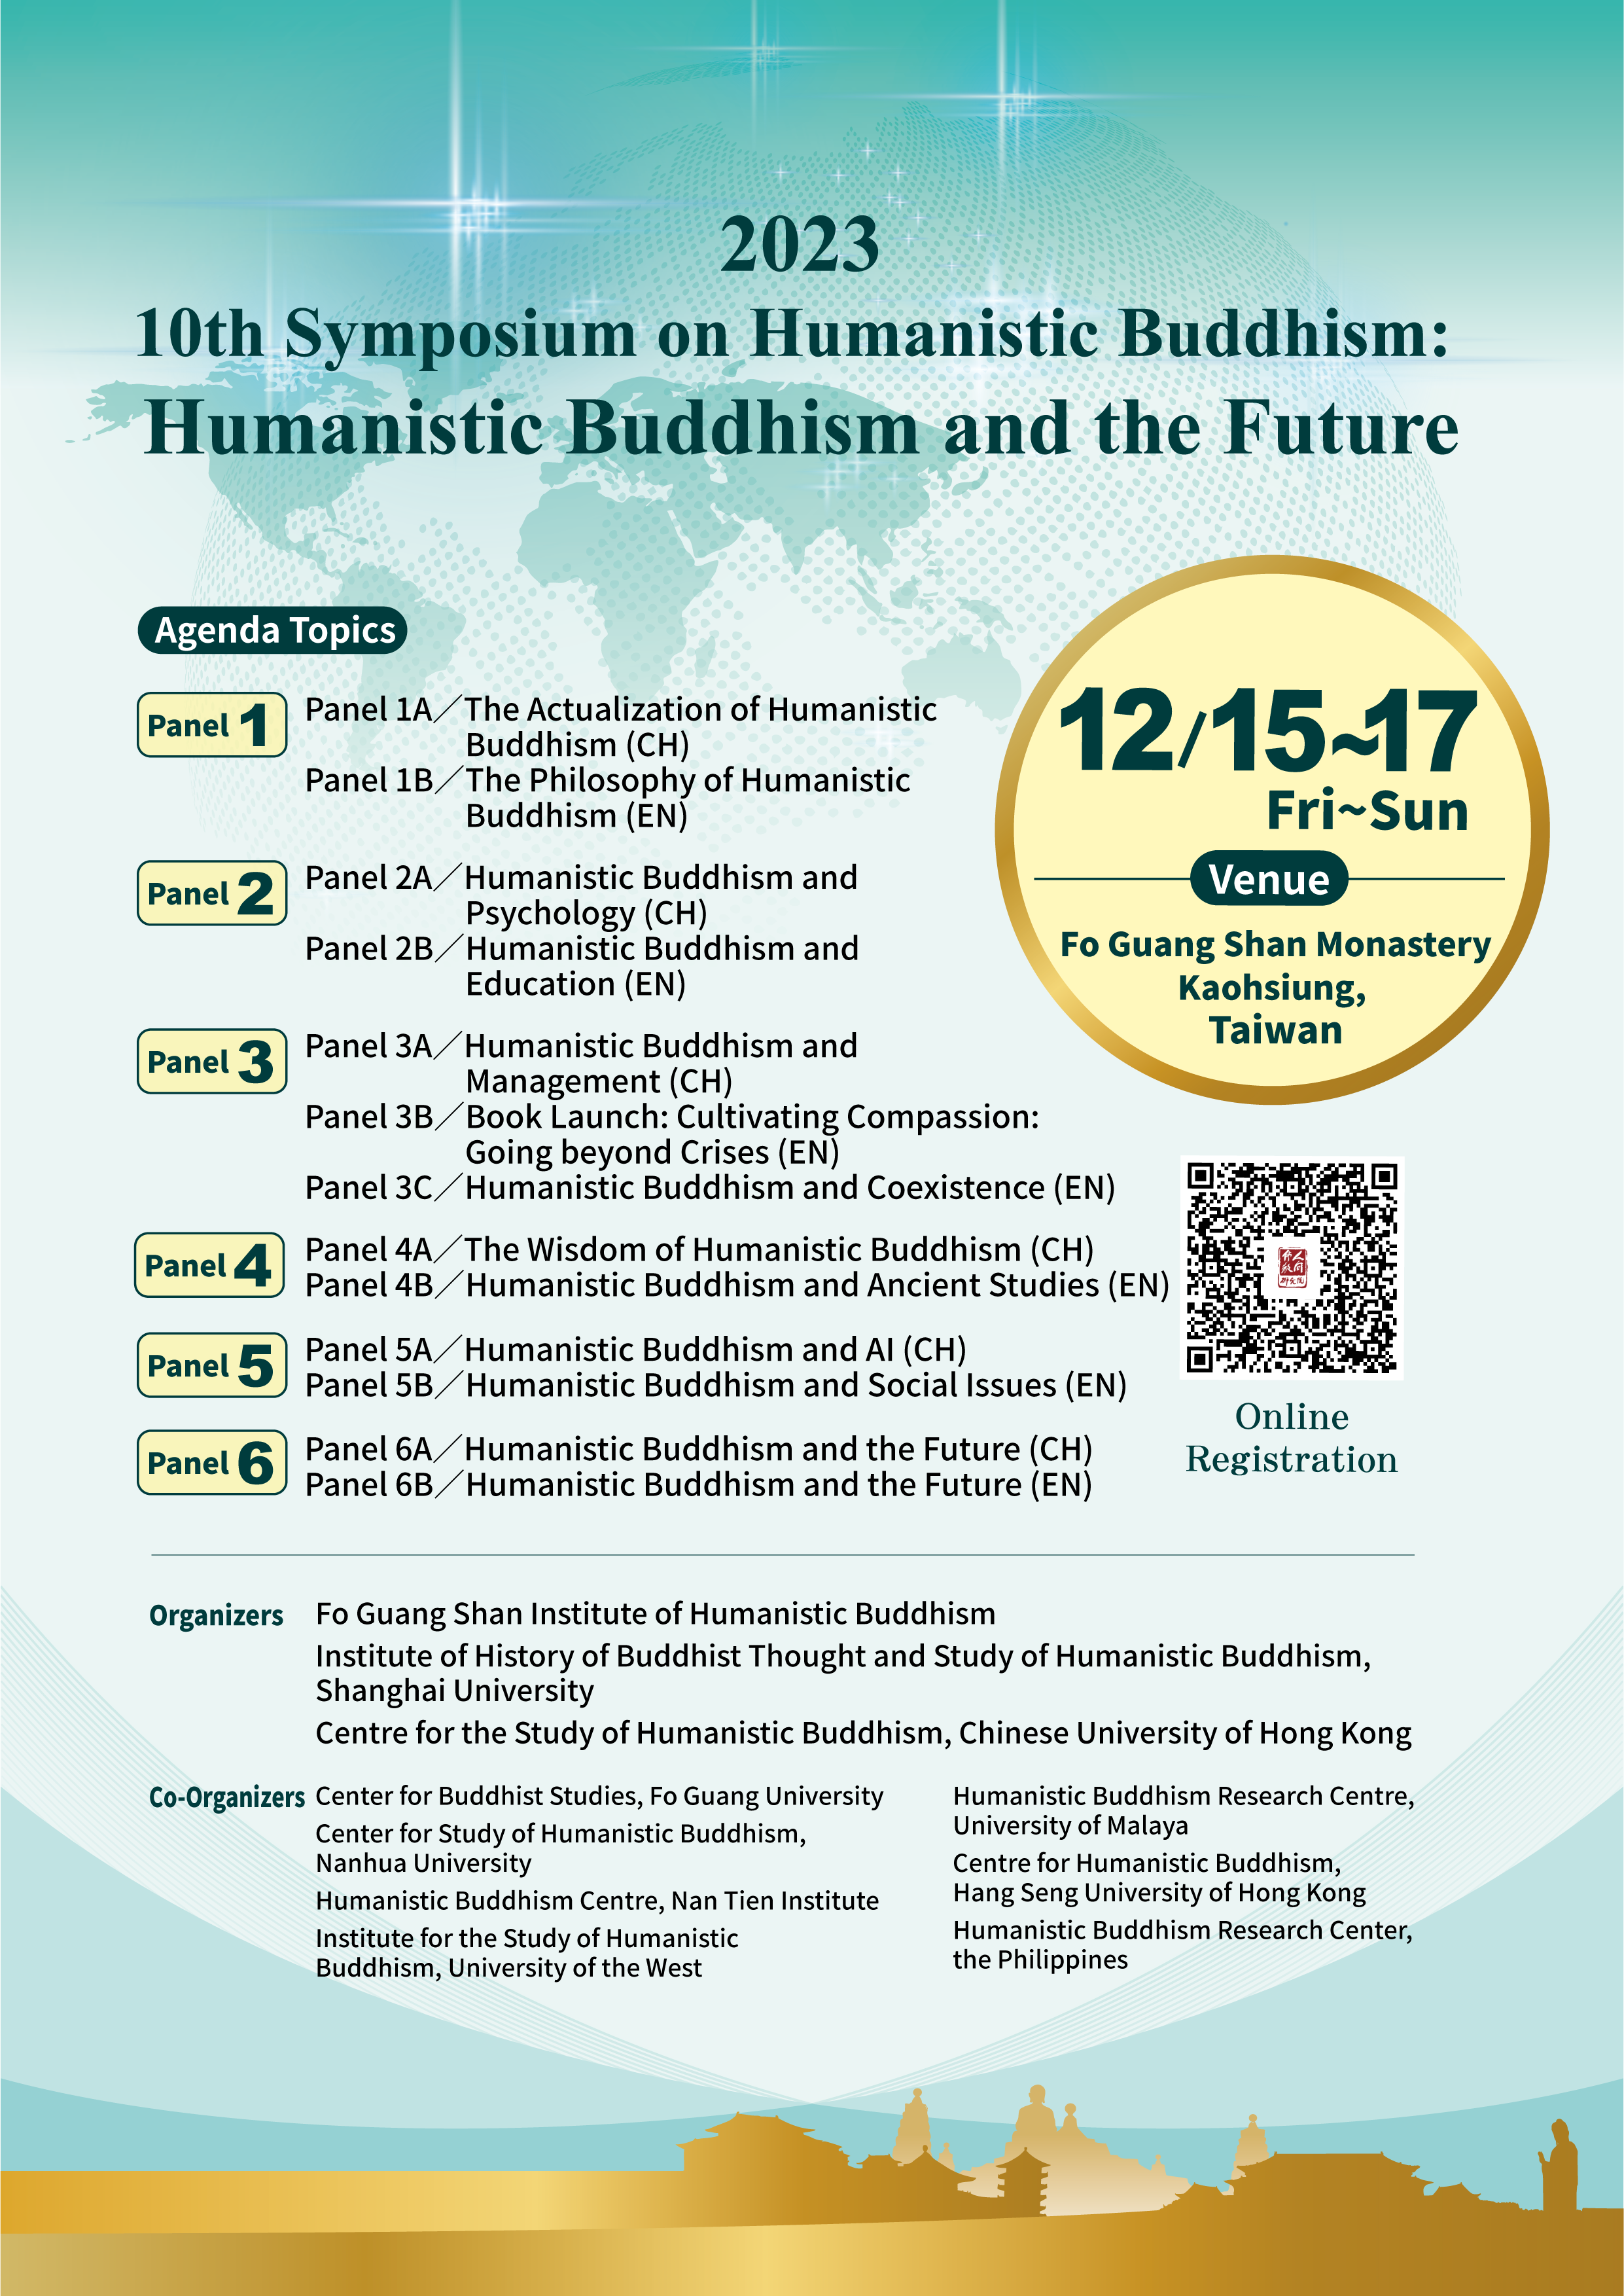 The 10th Symposium on Humanistic Buddhism, “Humanistic Buddhism and the Future”